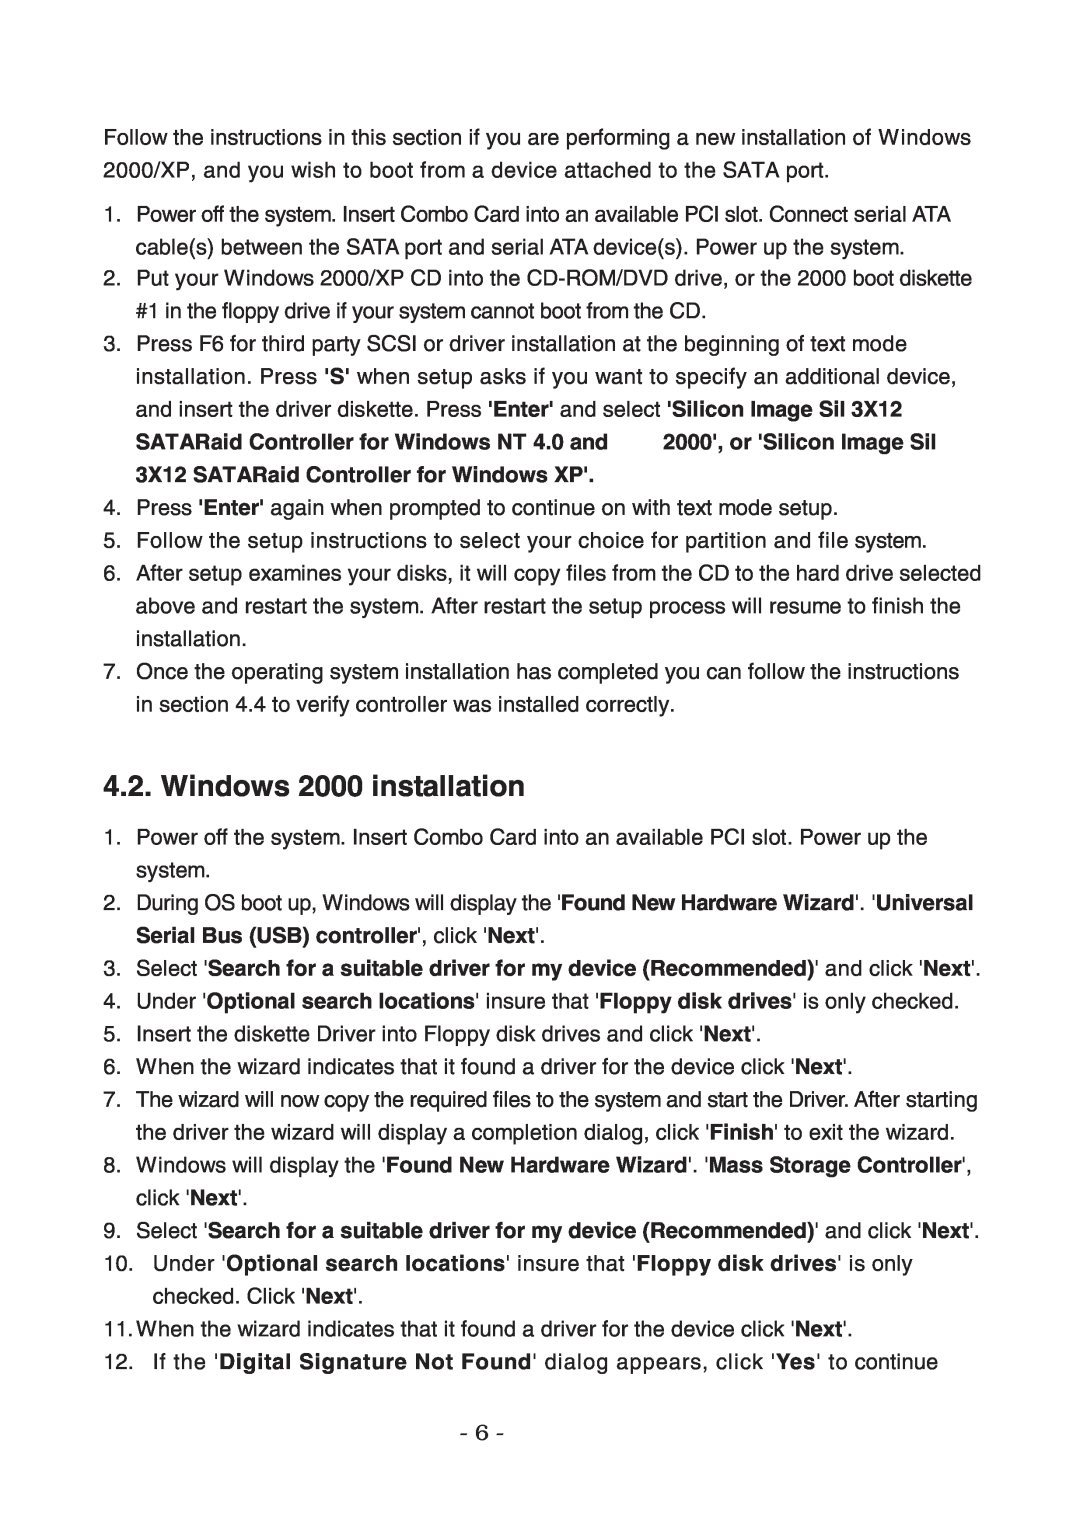 Lindy 70536 user manual Windows 2000 installation, SATARaid Controller for Windows NT 4.0 and, 2000, or Silicon Image SiI 